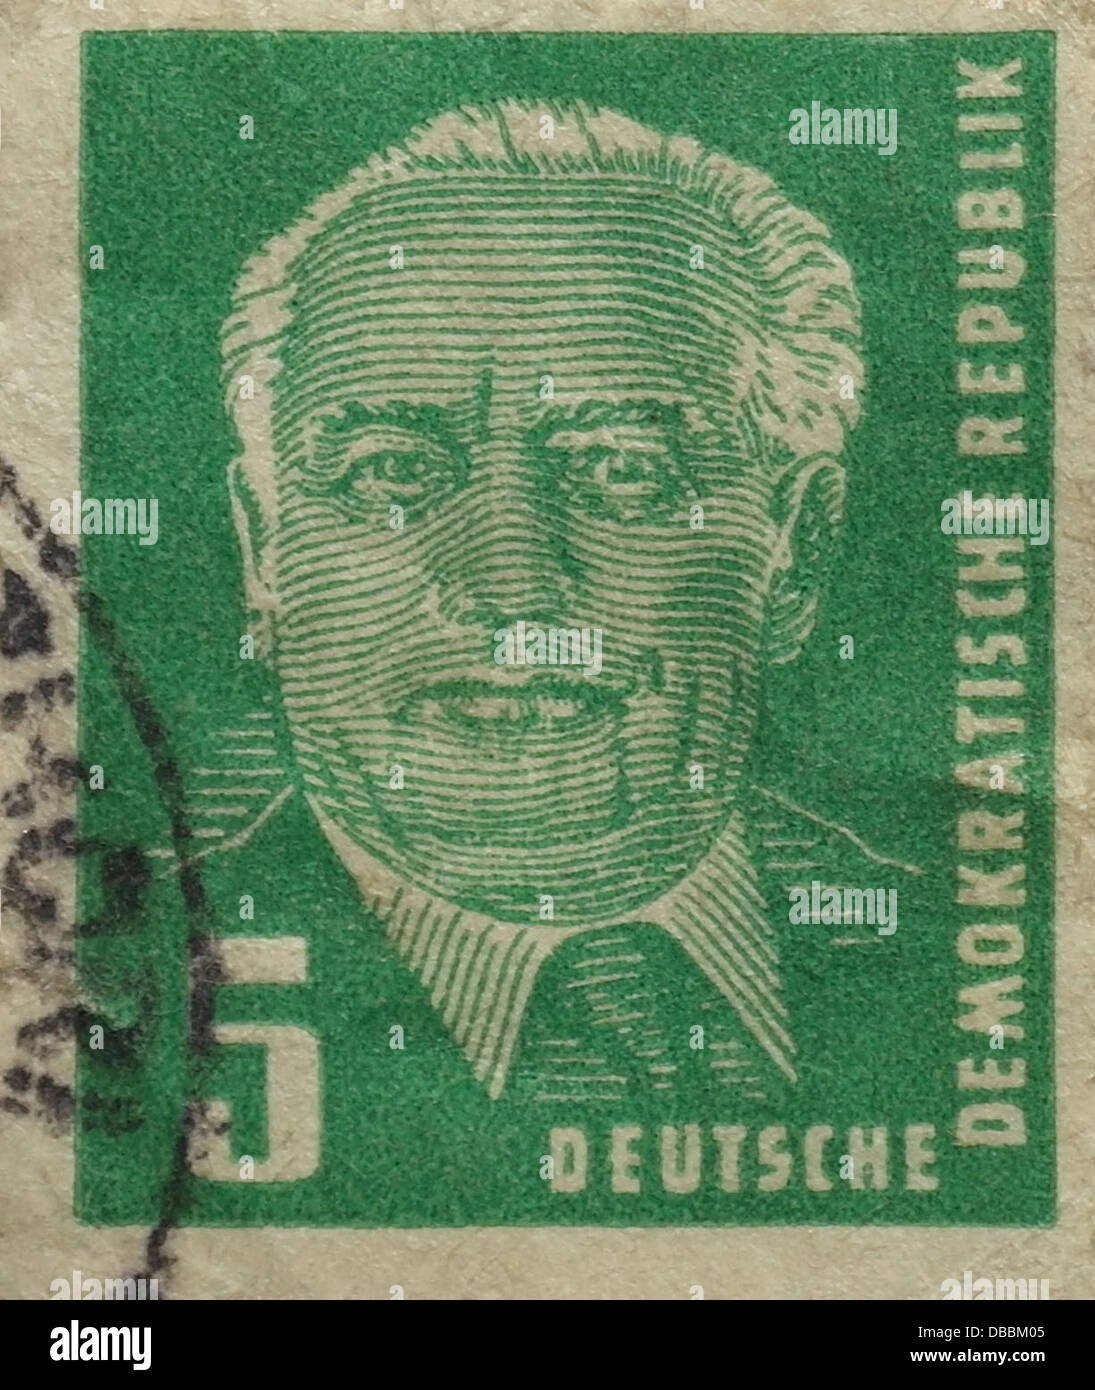 Green 5 Pfennigs postage stamp, issued in 1950, bearing the head and face of Wilhelm Pieck, President of East Germany 1949-60 Stock Photo